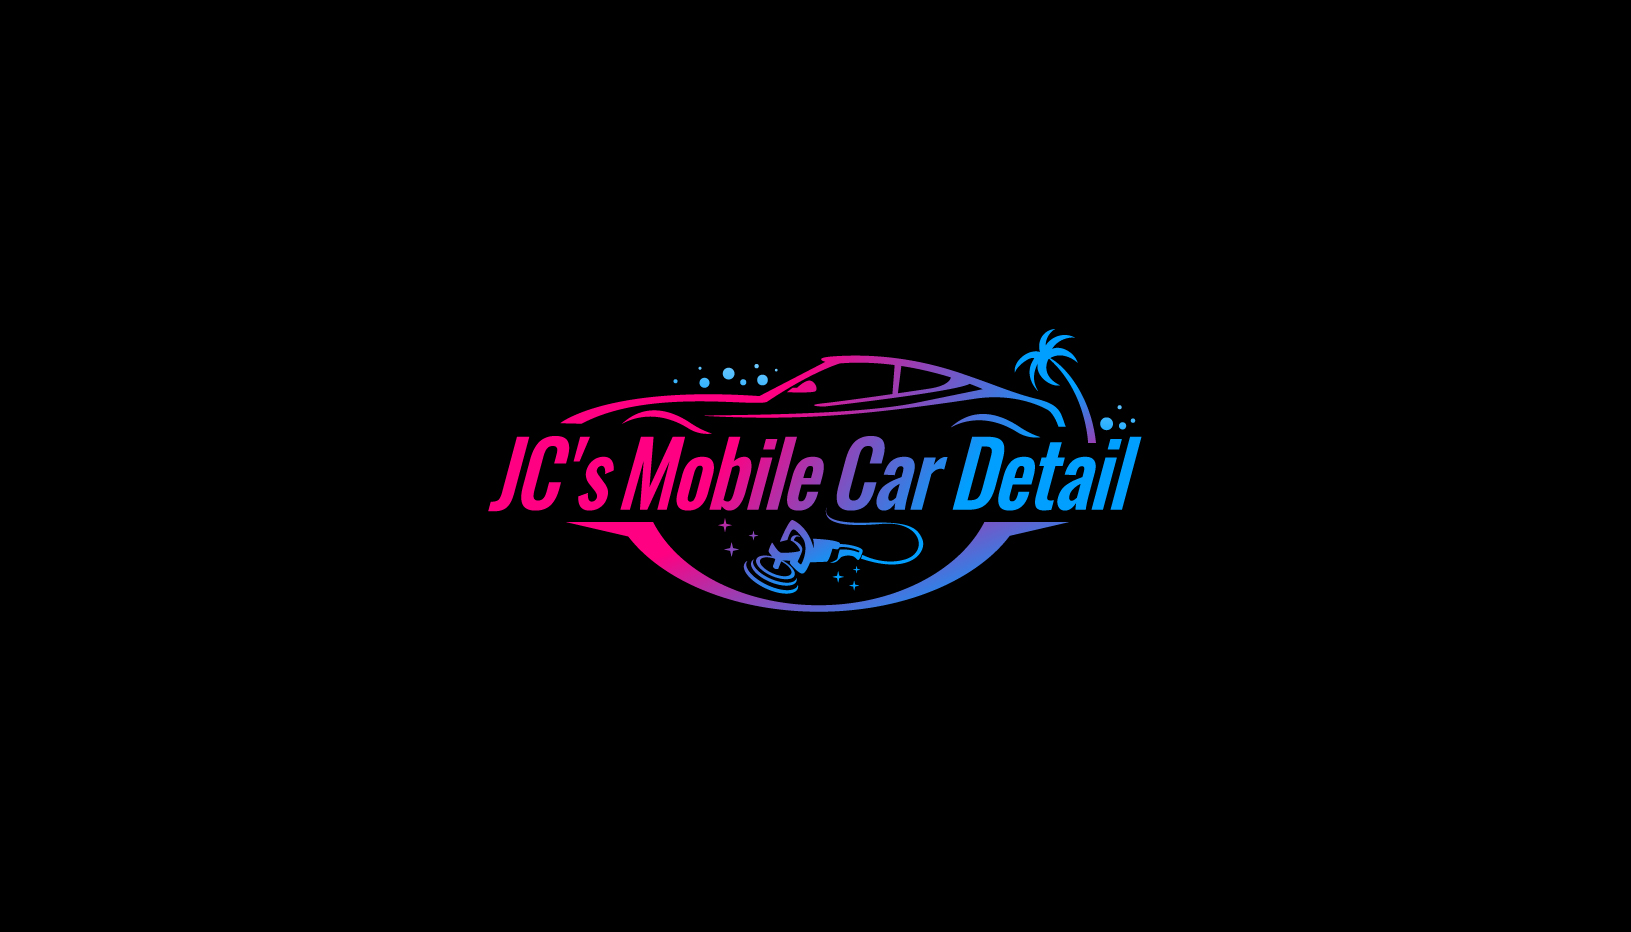 JC's Mobile Car Detailing and Wash